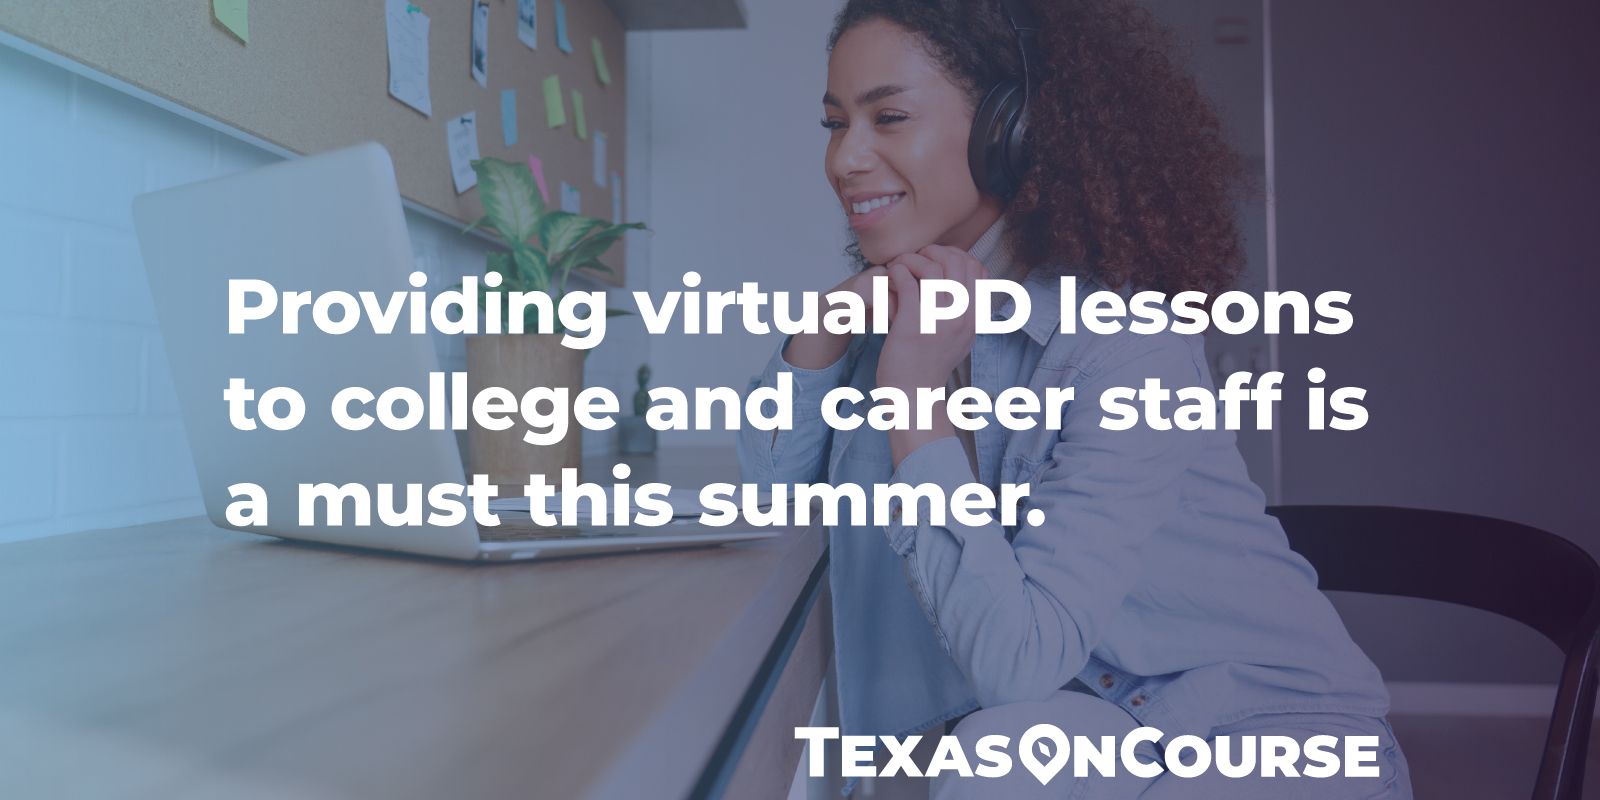 Providing virtual PD lessons to college and career staff is a must this summer.